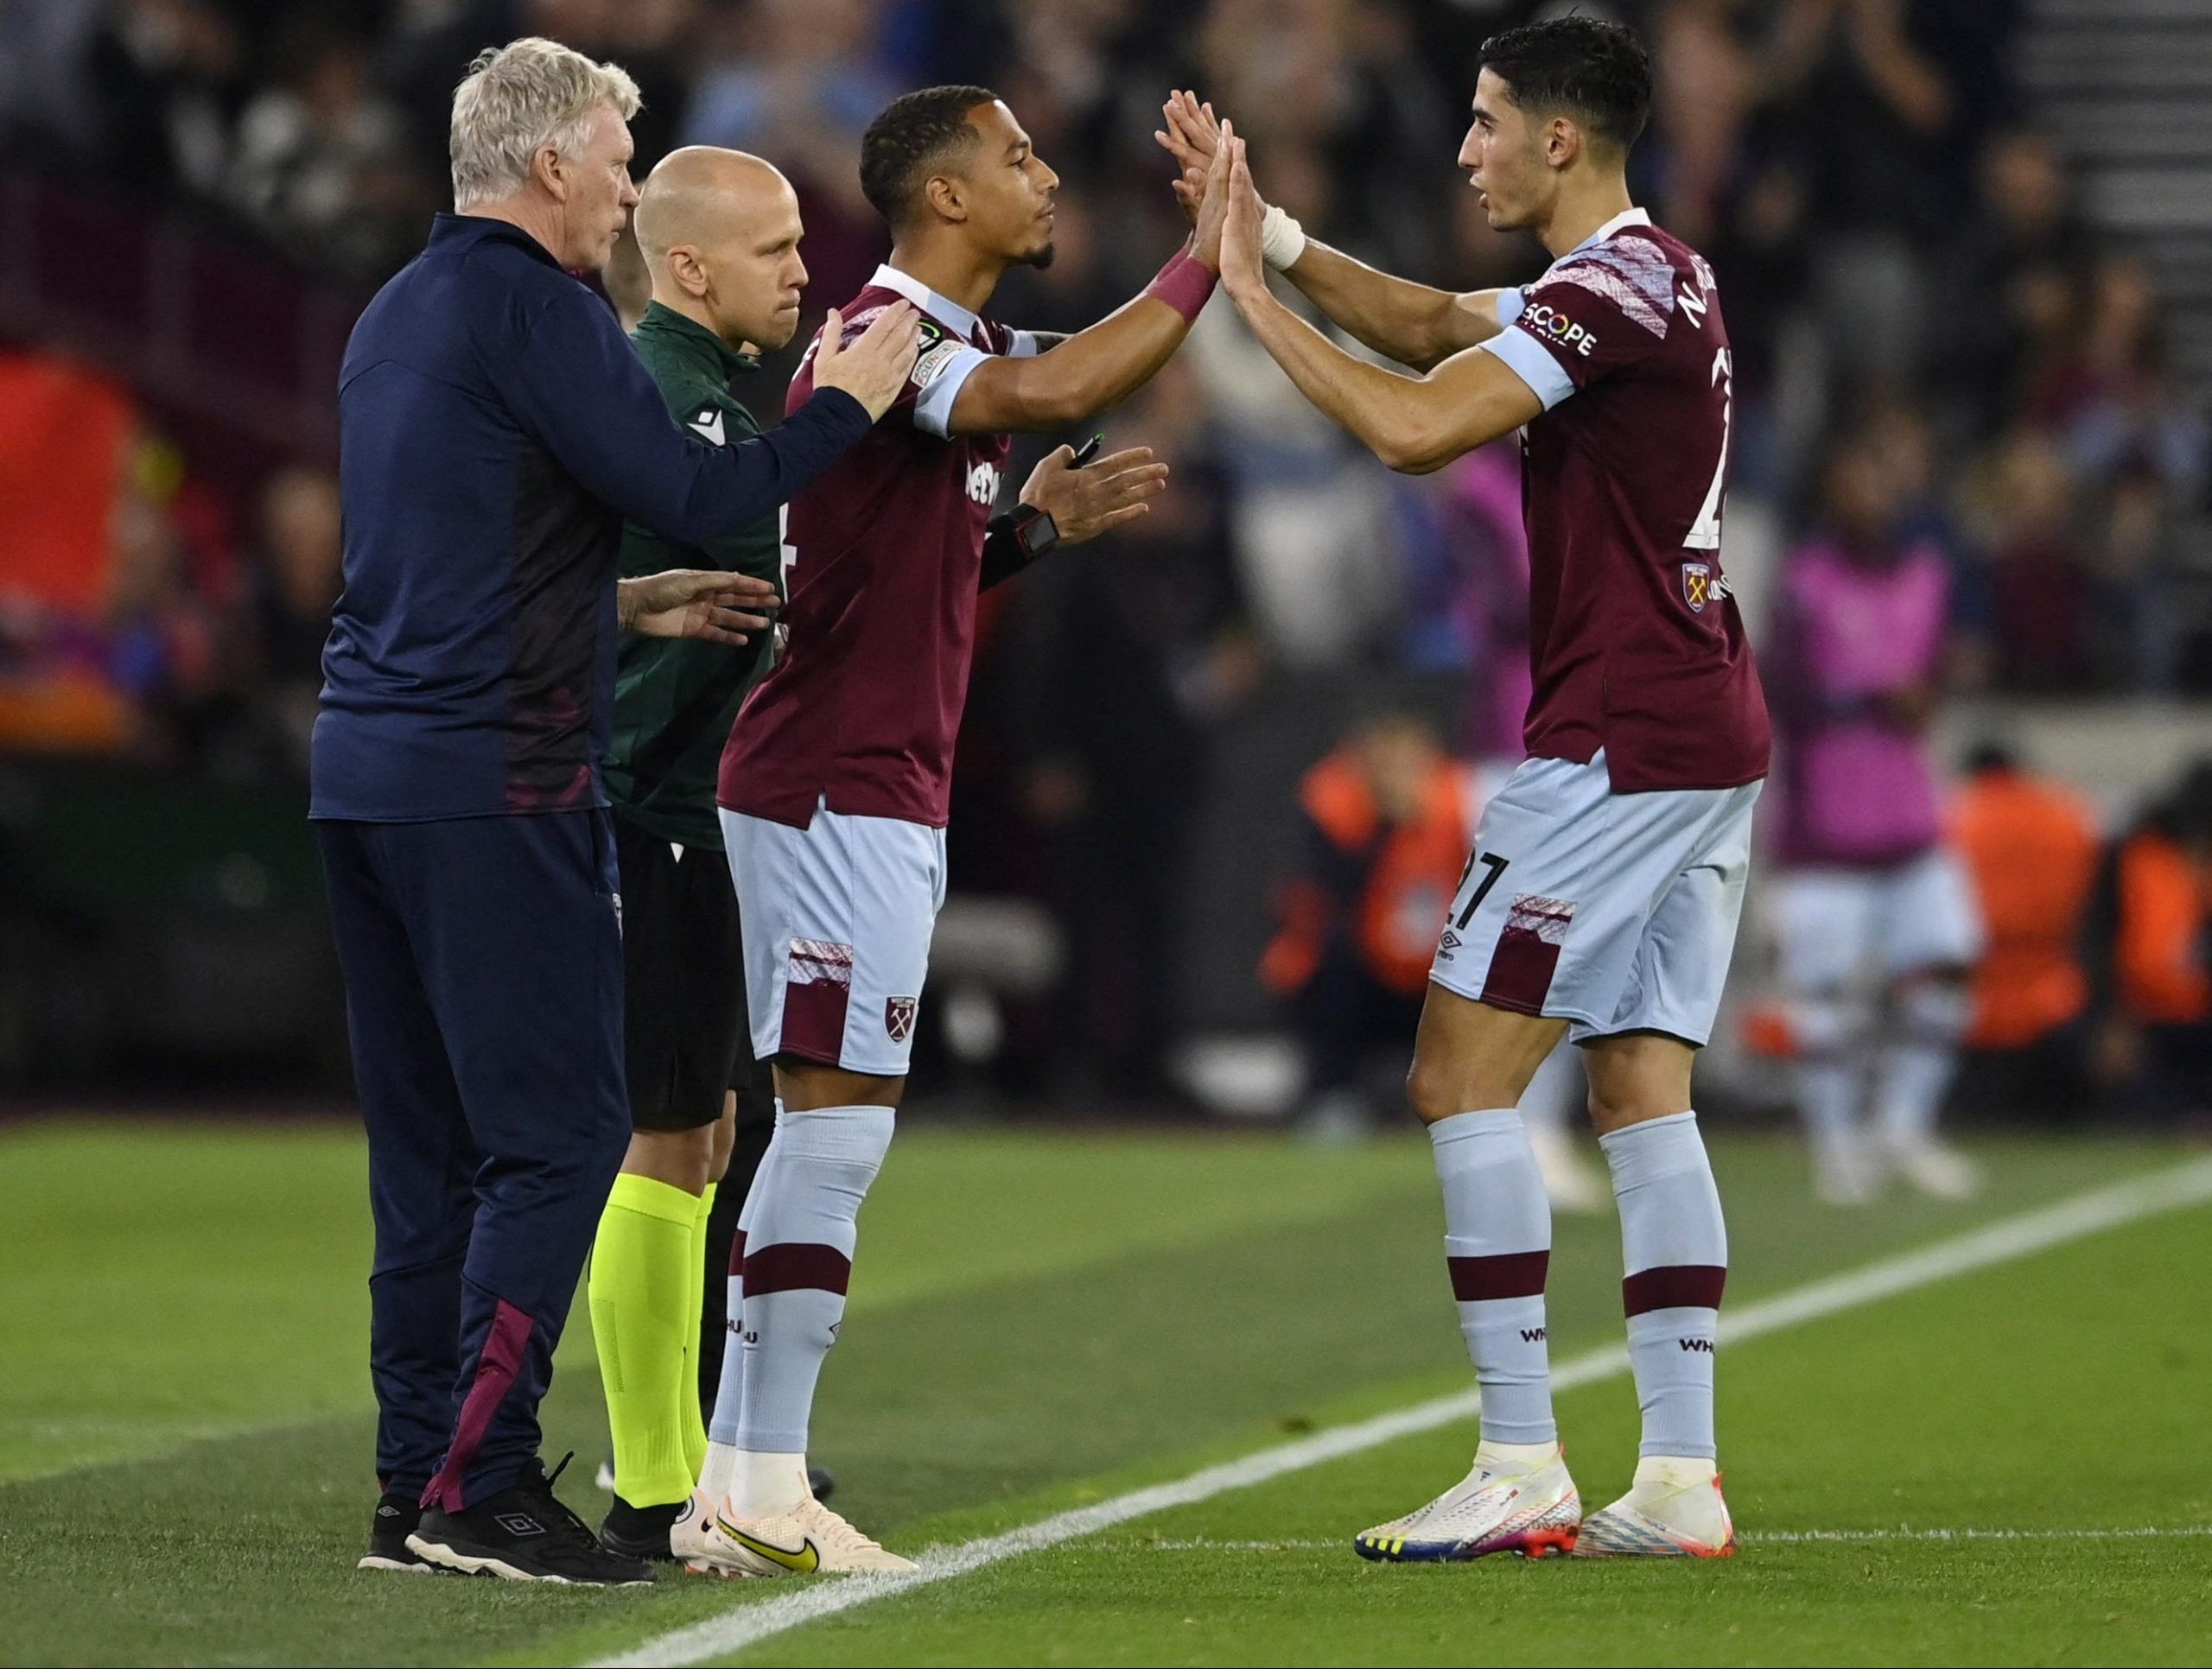 Soccer Football - Europa Conference League - Group B - West Ham United v Silkeborg - London Stadium, London, Britain - October 27, 2022 West Ham United's Thilo Kehrer comes on as a substitute to replace Nayef Aguerd as manager David Moyes looks on REUTERS/Tony Obrien